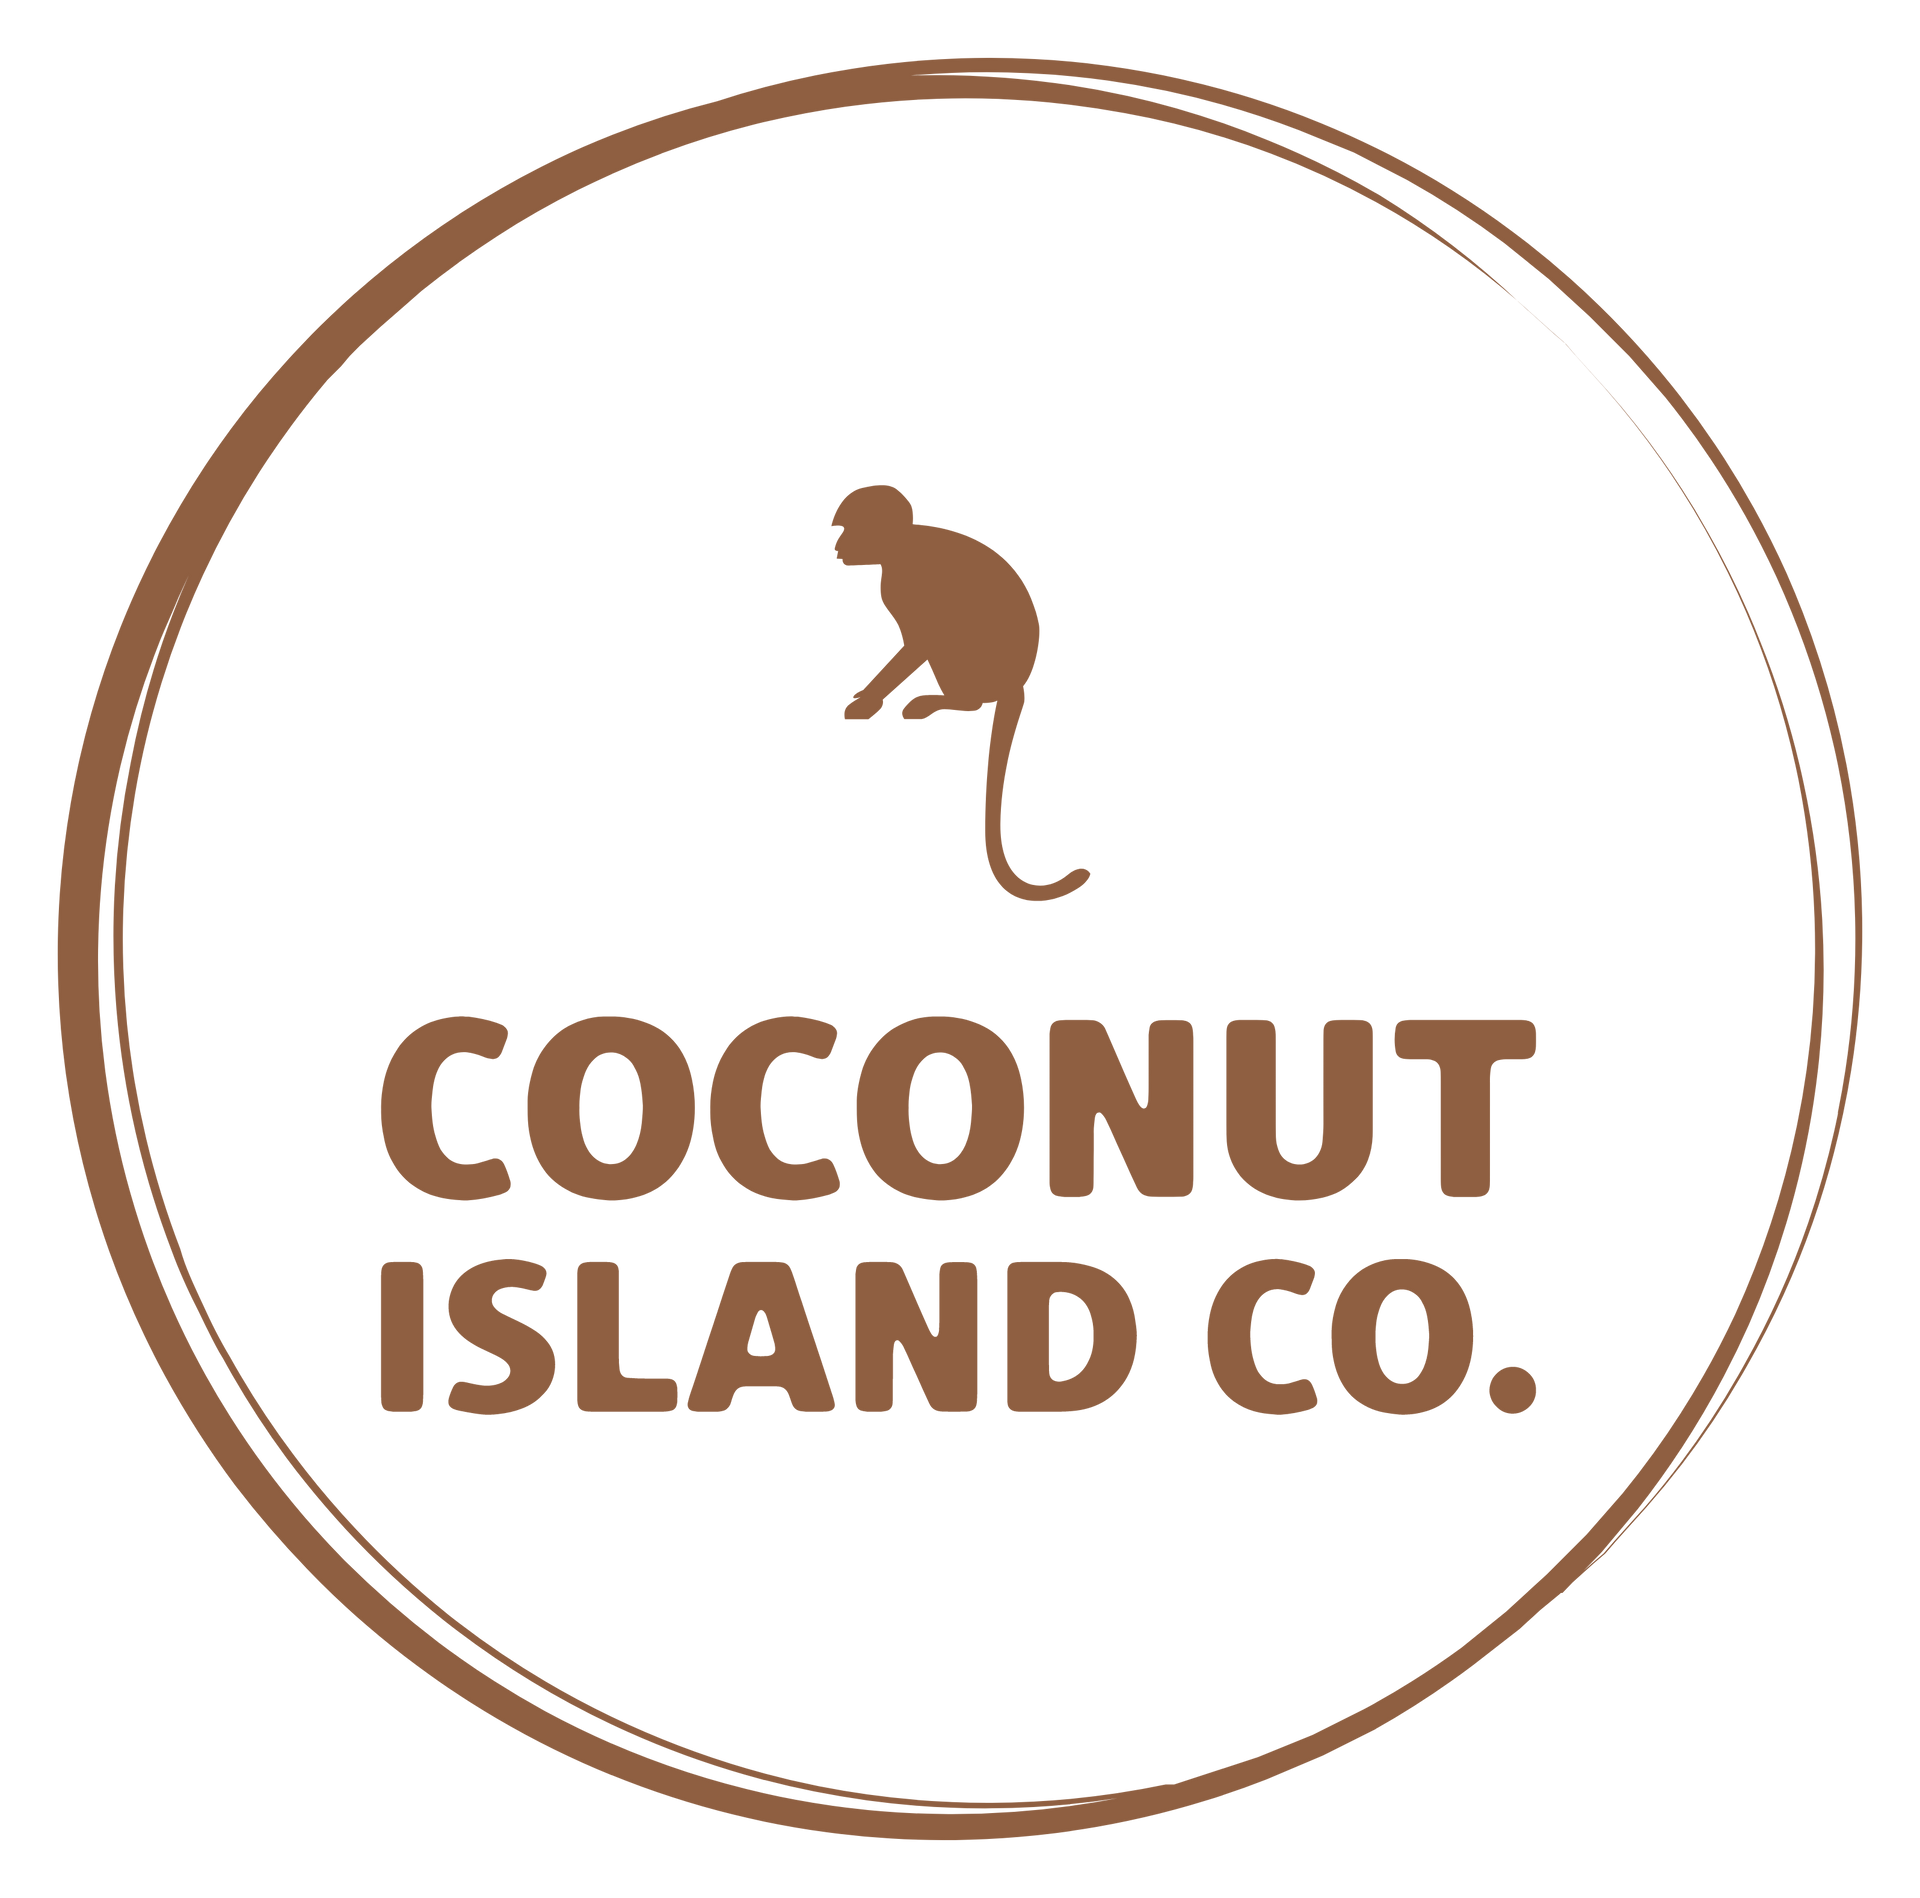 a logo for coconut island co. with a monkey on it